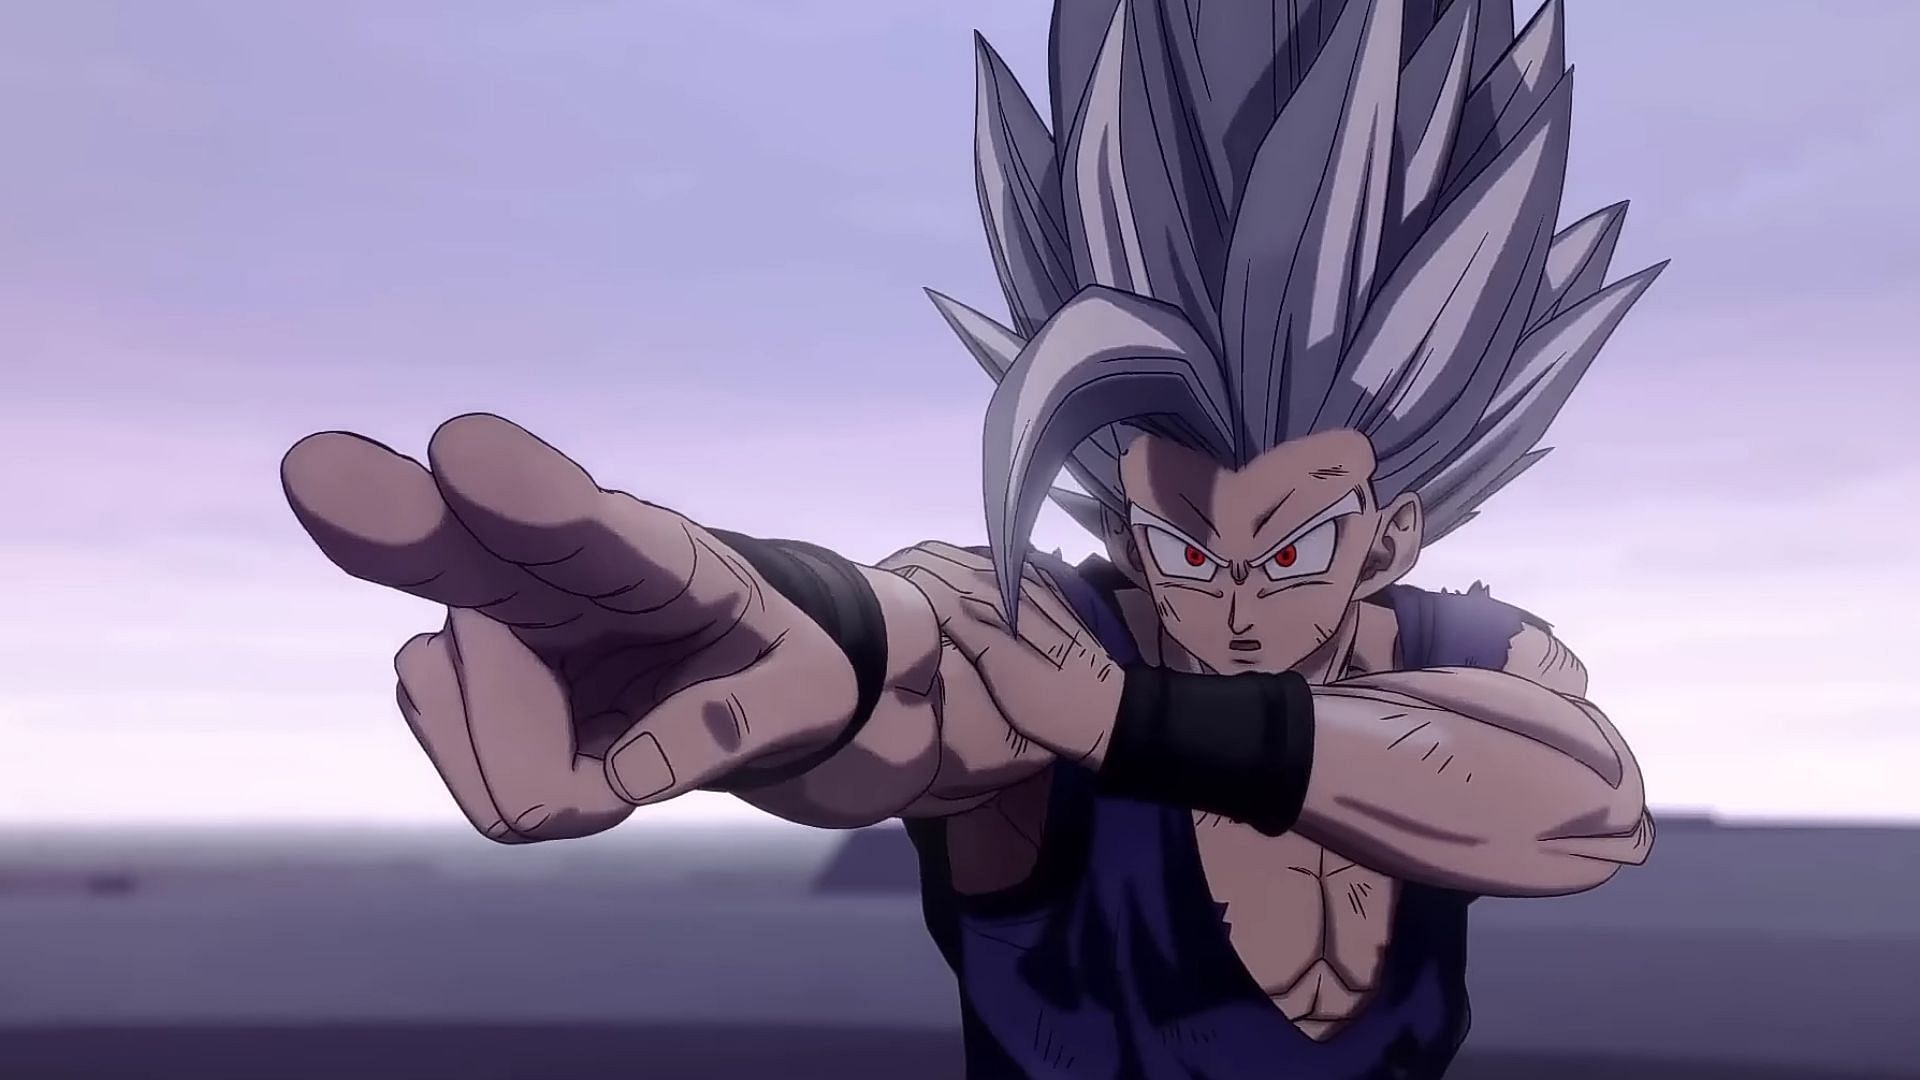 Gohan Beast as seen in the film (Image via Toei Animation)